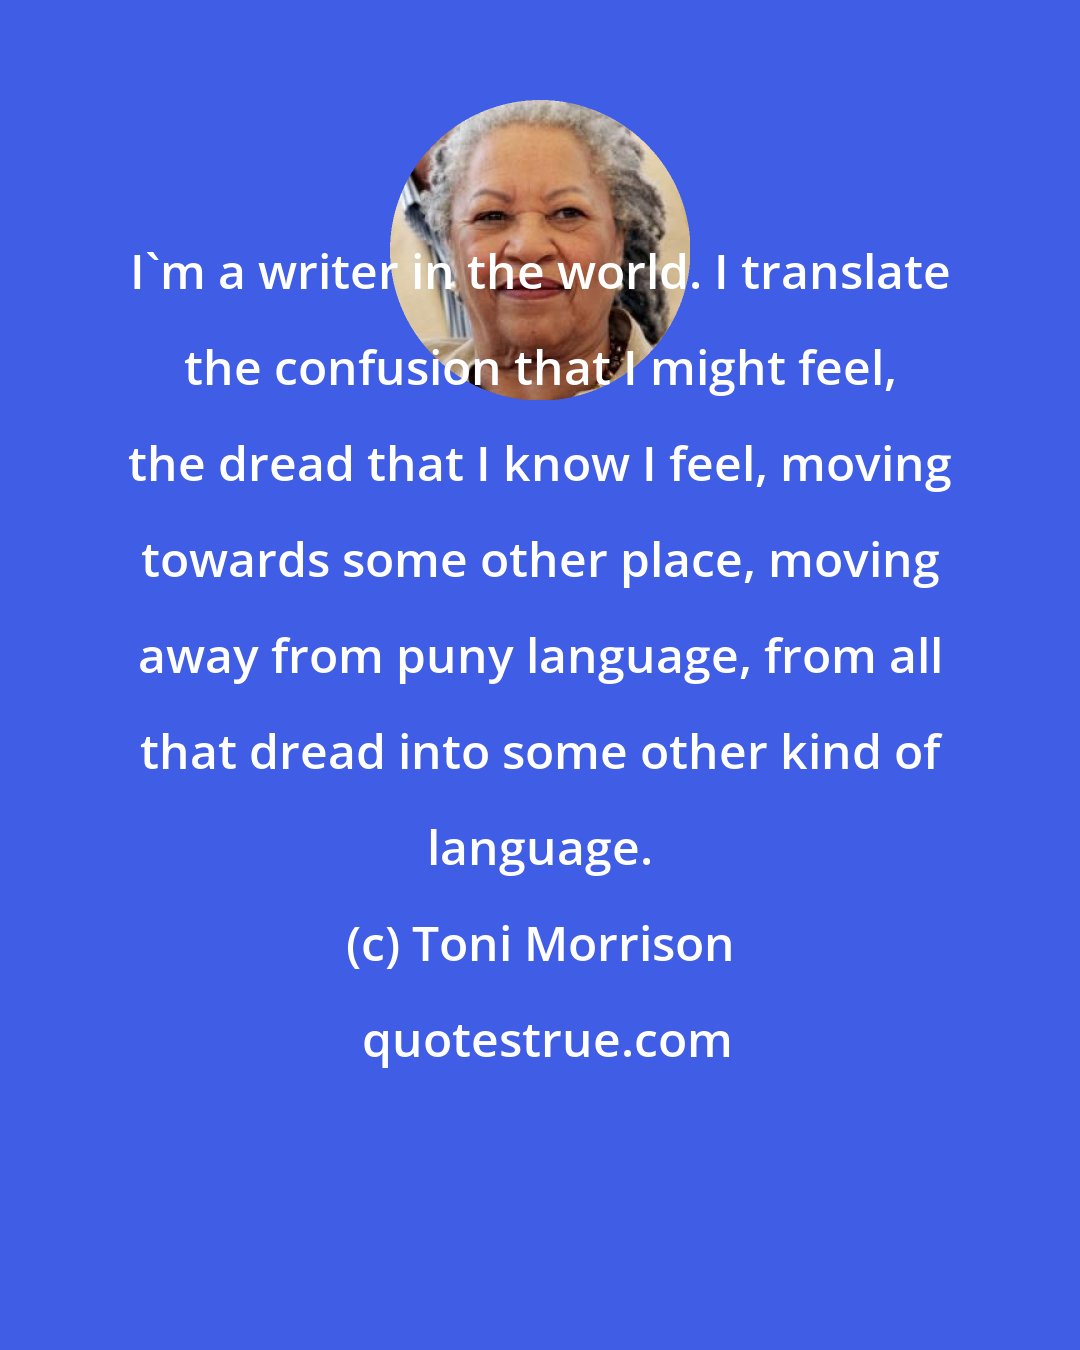 Toni Morrison: I'm a writer in the world. I translate the confusion that I might feel, the dread that I know I feel, moving towards some other place, moving away from puny language, from all that dread into some other kind of language.